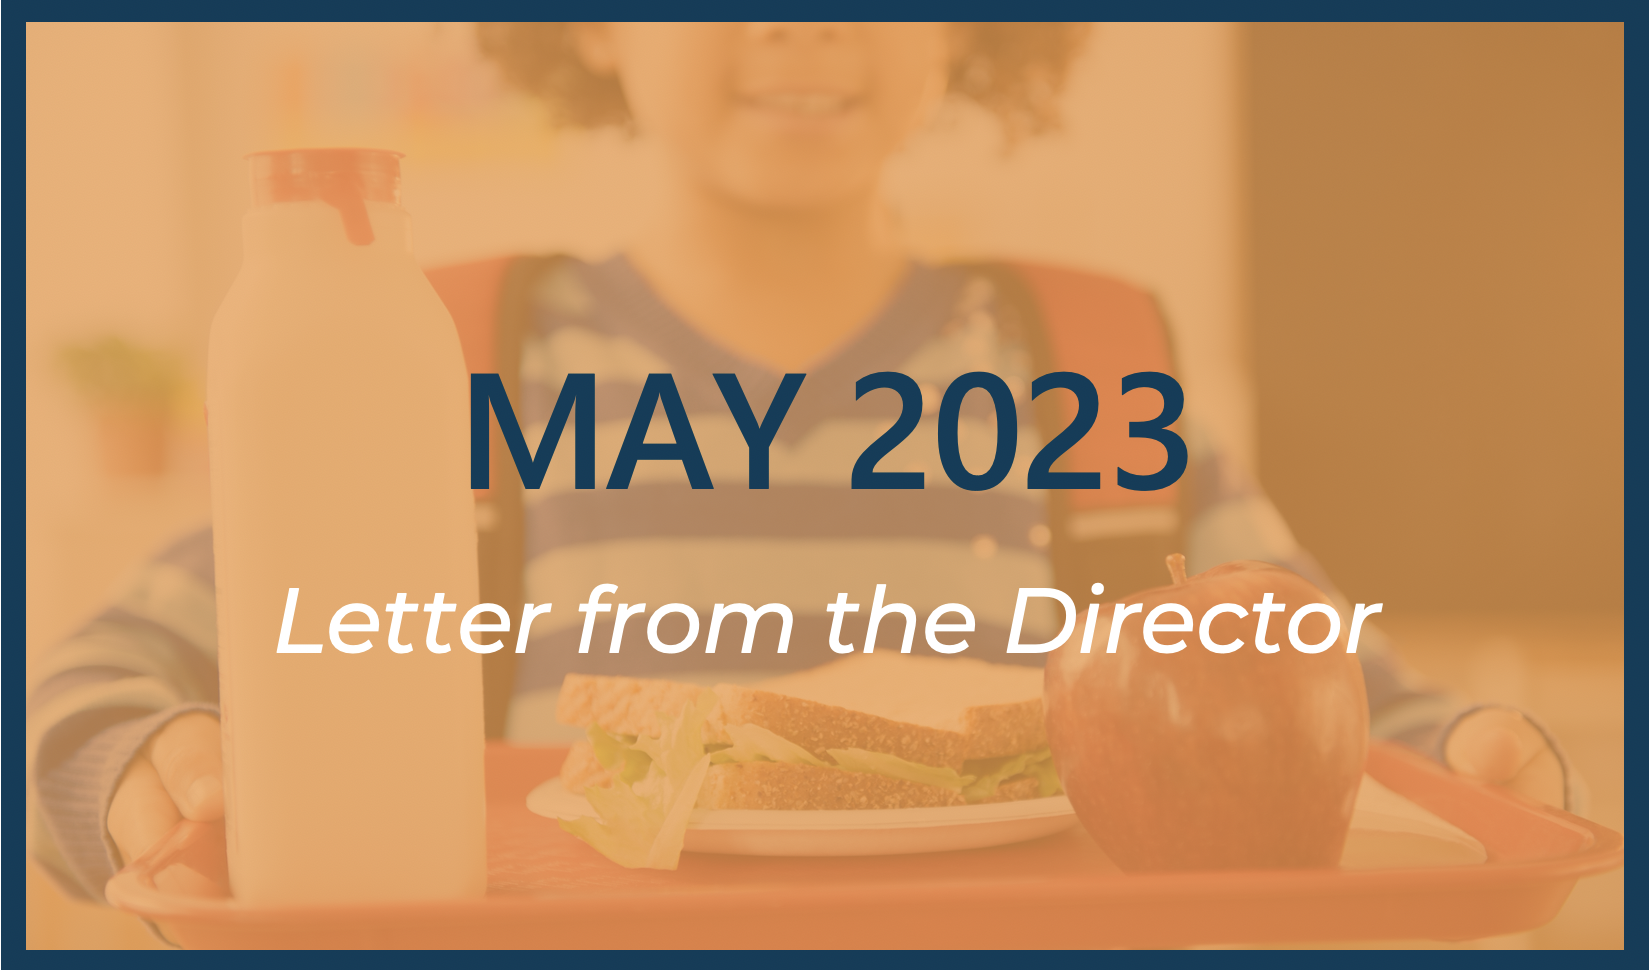 May 2023 Letter from the Director 